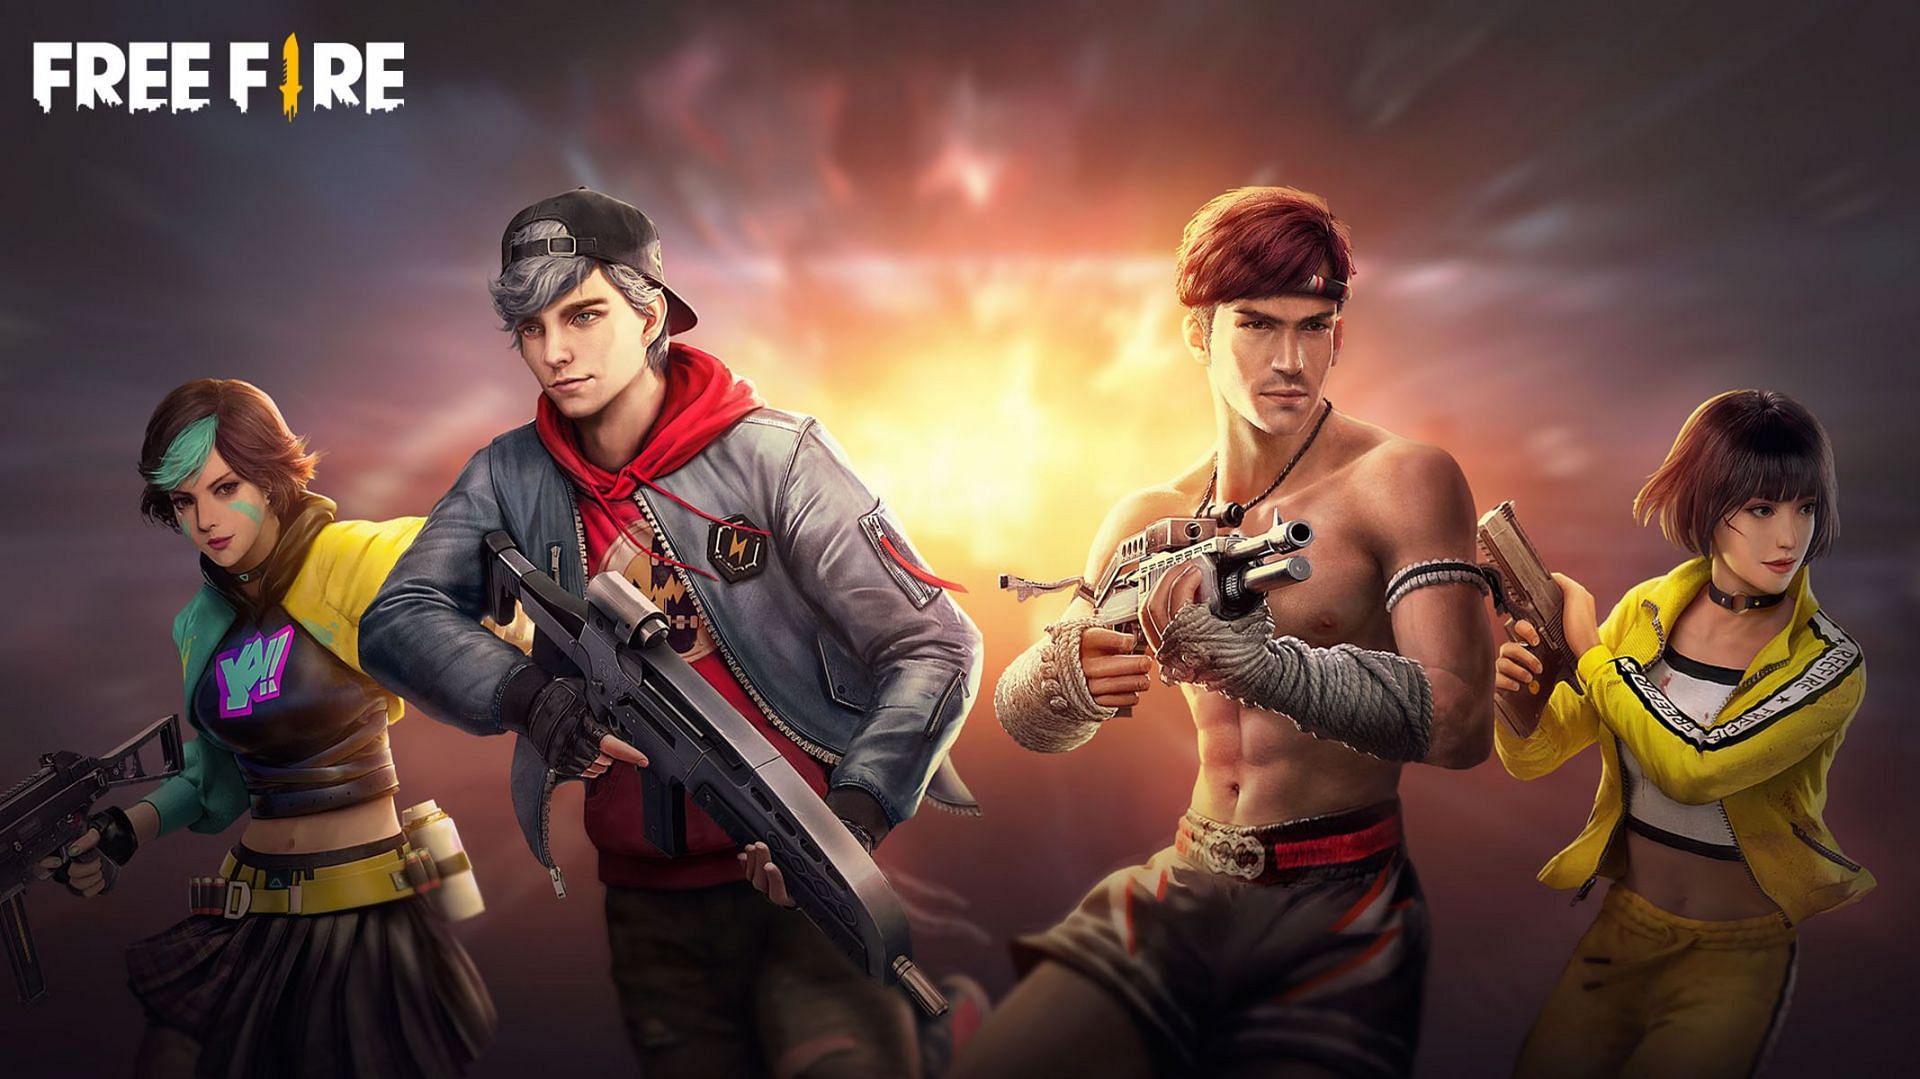 The most popular emotes in Free Fire (Image via Garena)